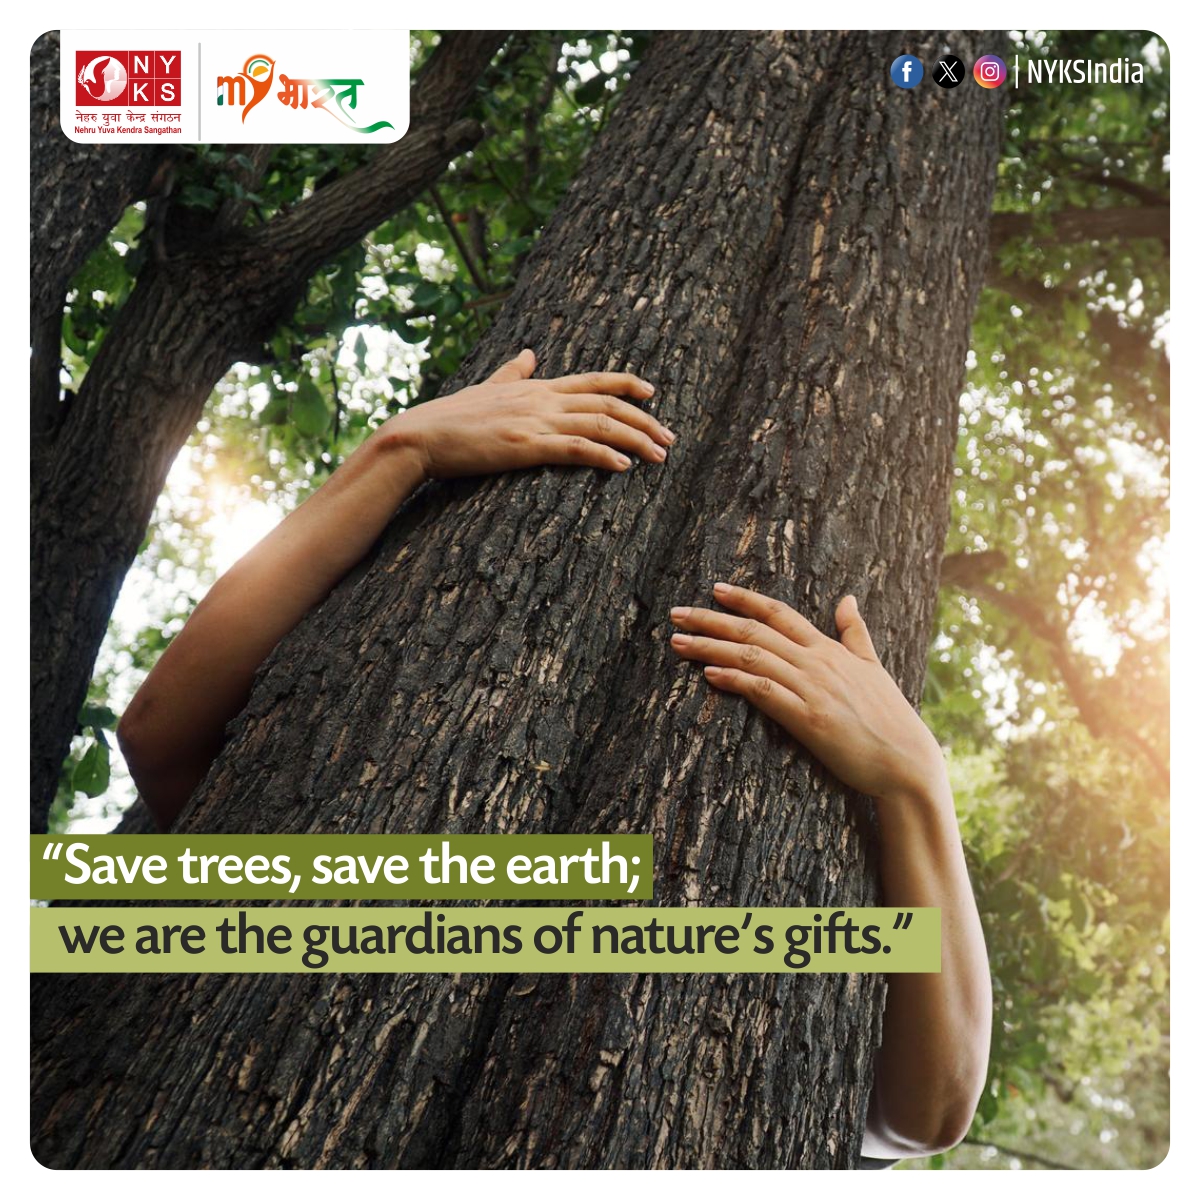 Be the guardian of our planet's green treasures. 🌳💚 Let's unite to save trees and protect our Earth's natural beauty. #SaveTrees #GuardiansOfNature #NYKS